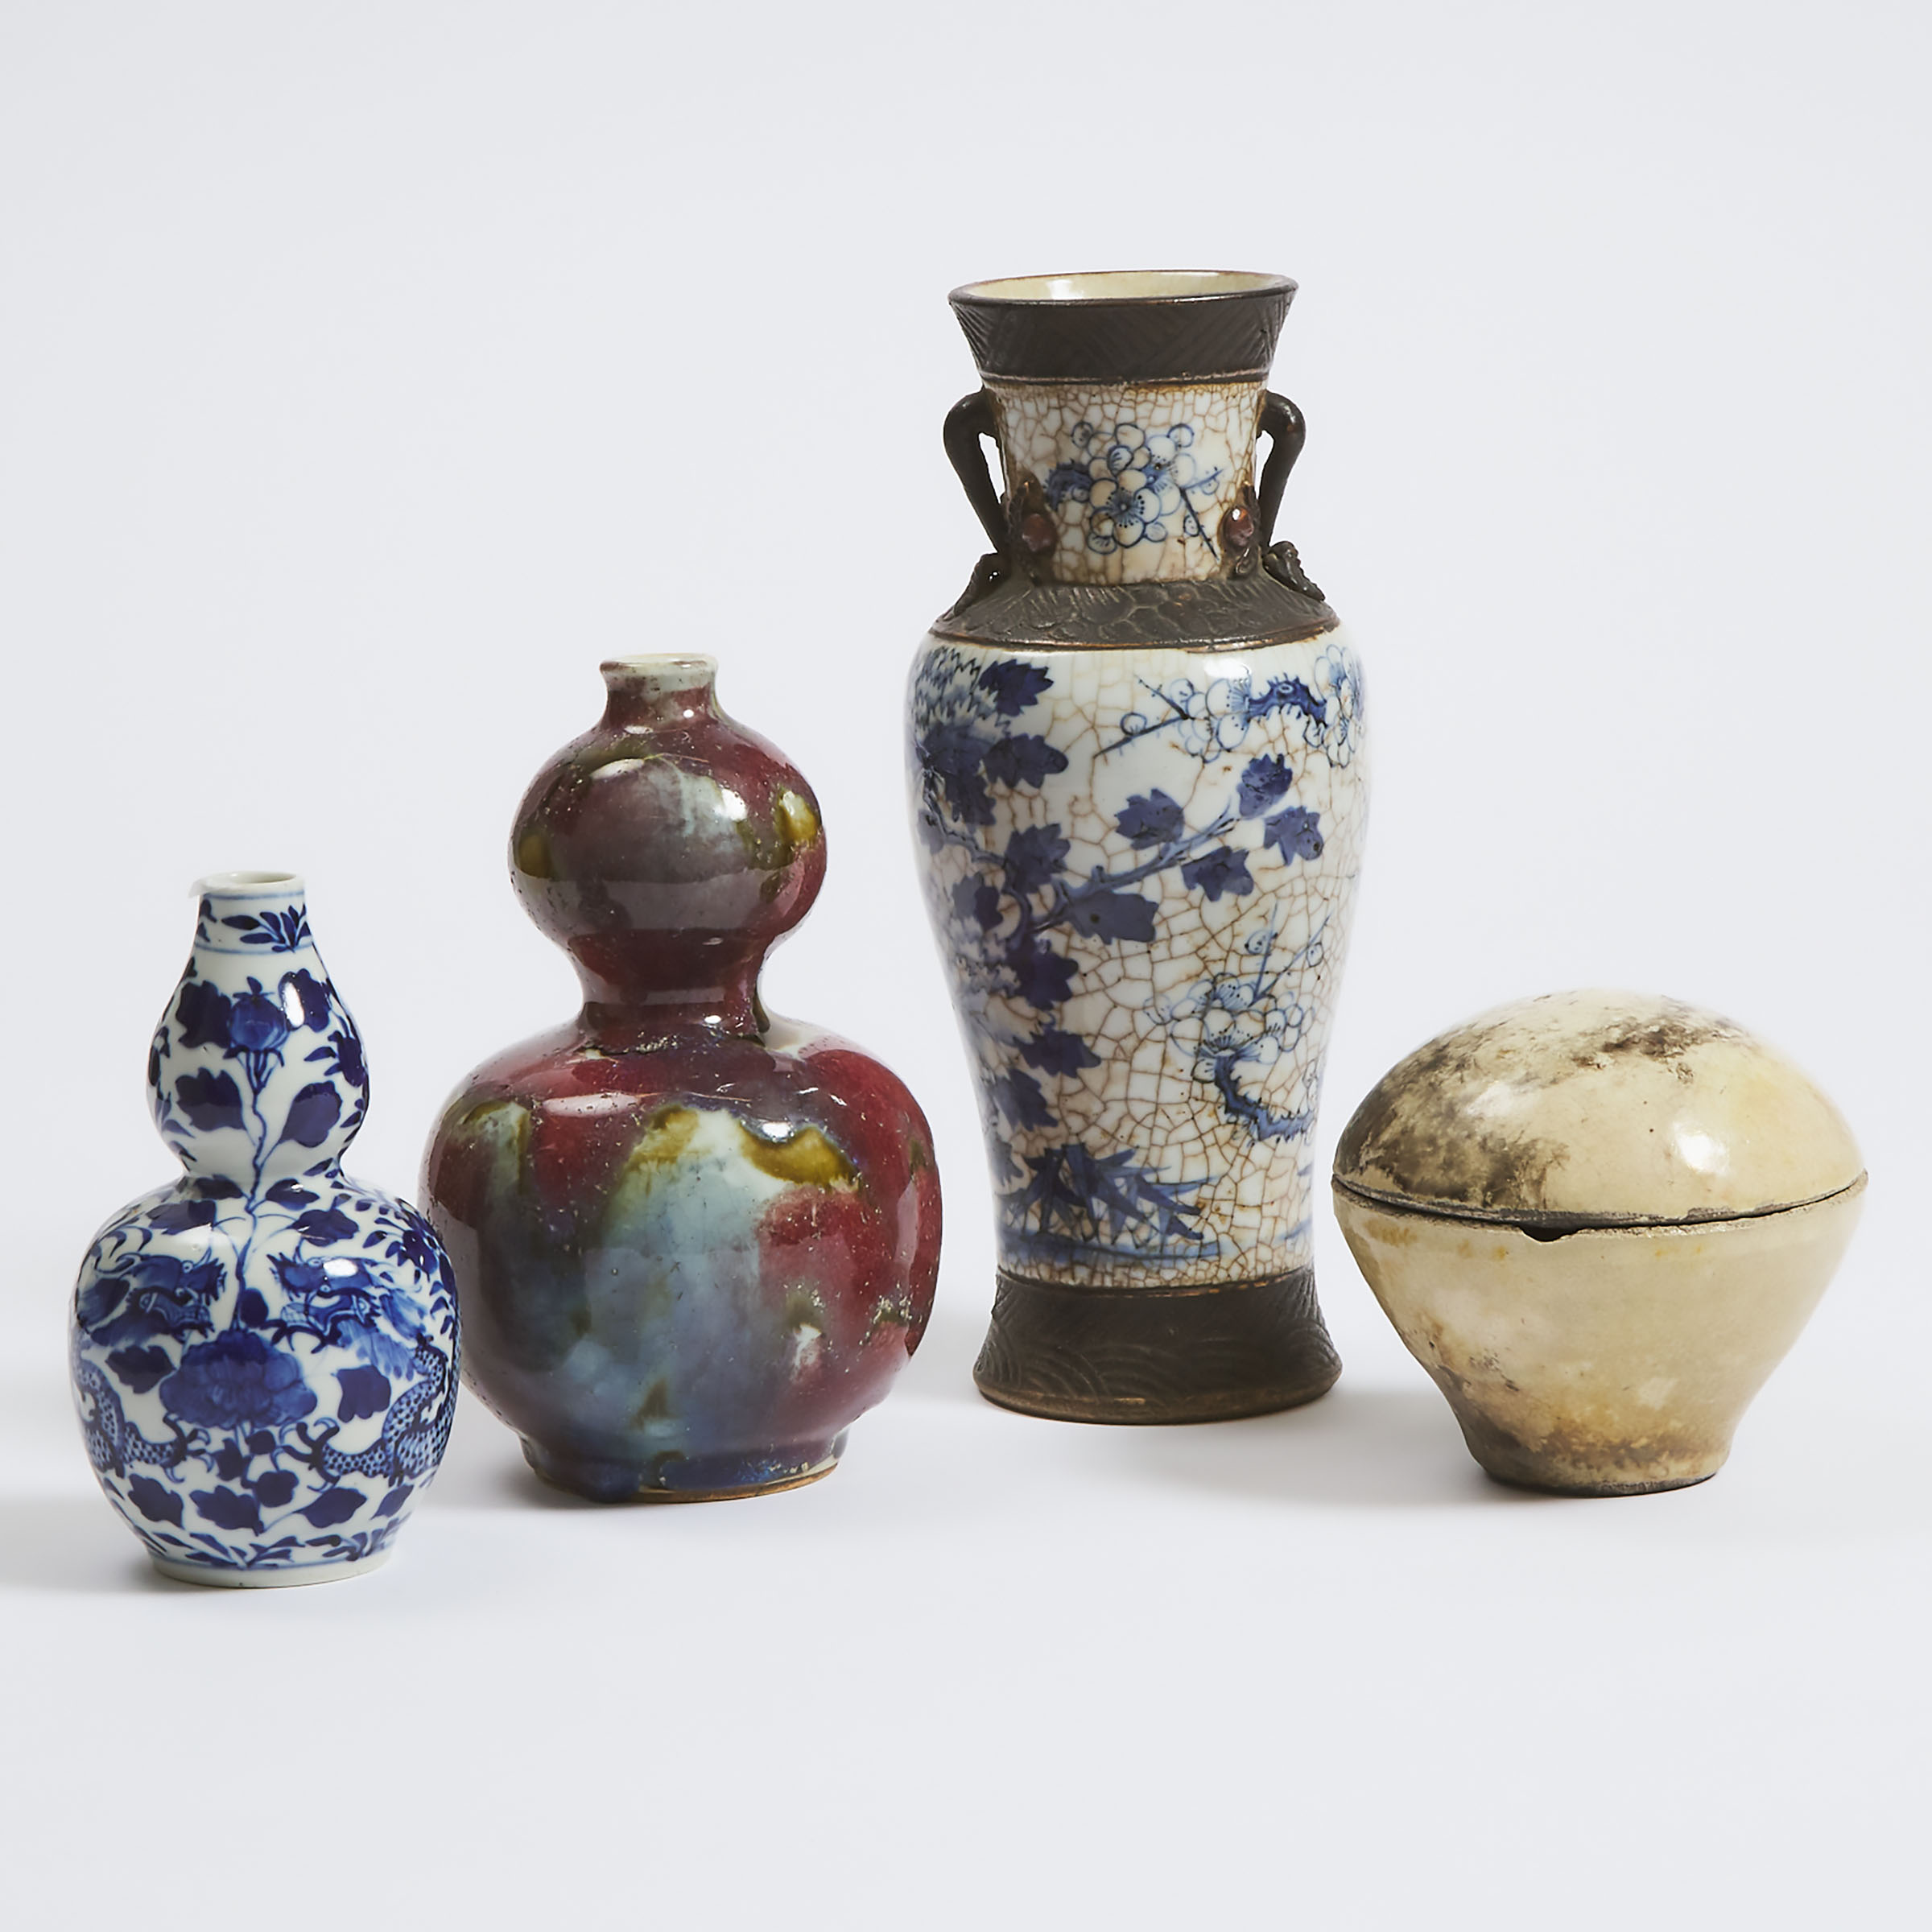 A Group of Four Chinese Ceramic Wares, 19th Century and Later